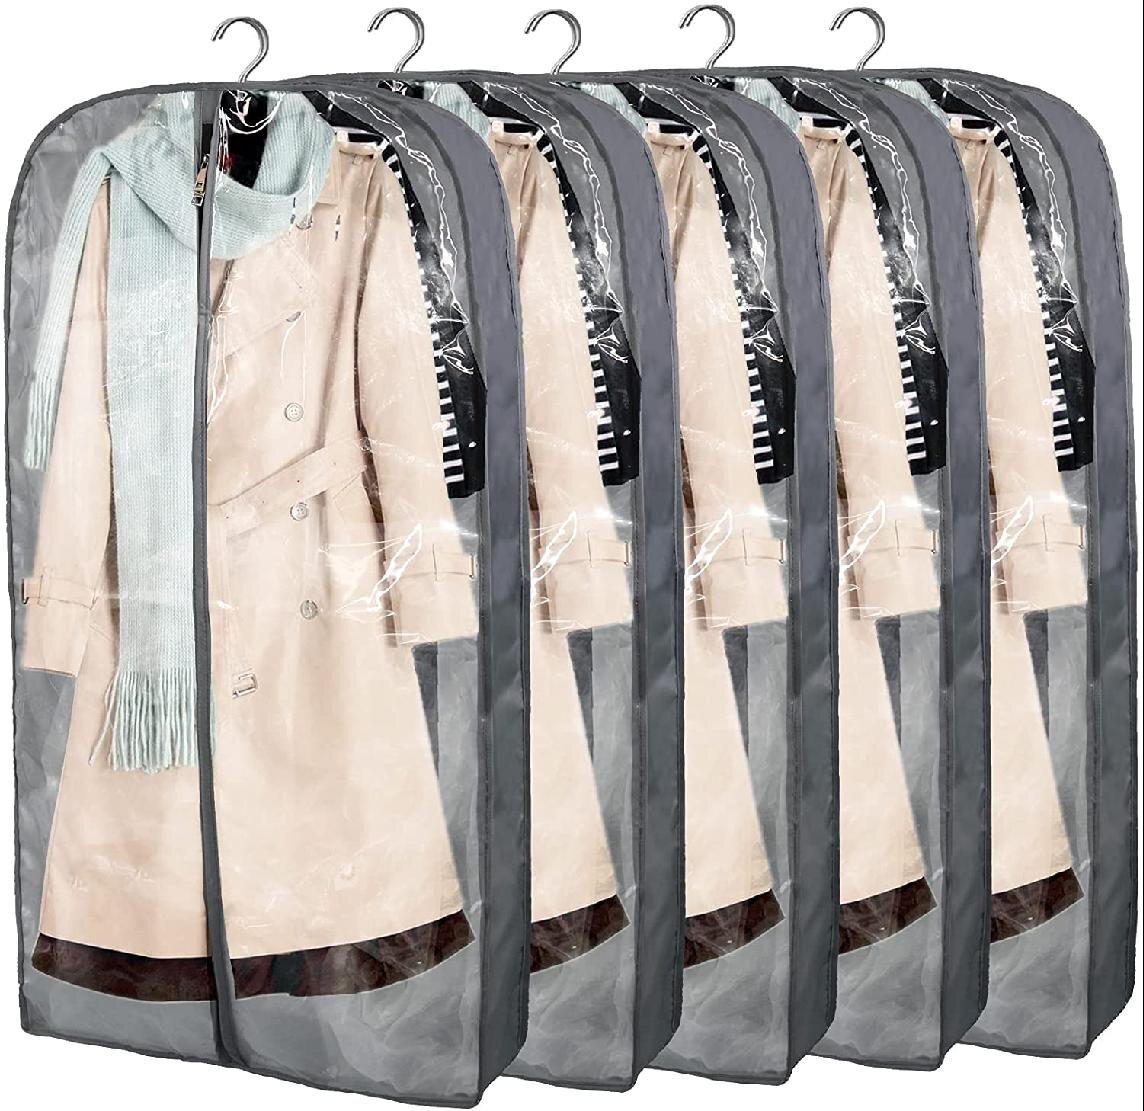 Garment Bag Organizer Storage Hanging Closet Cover with Clear PVC Zipper 43 inch 